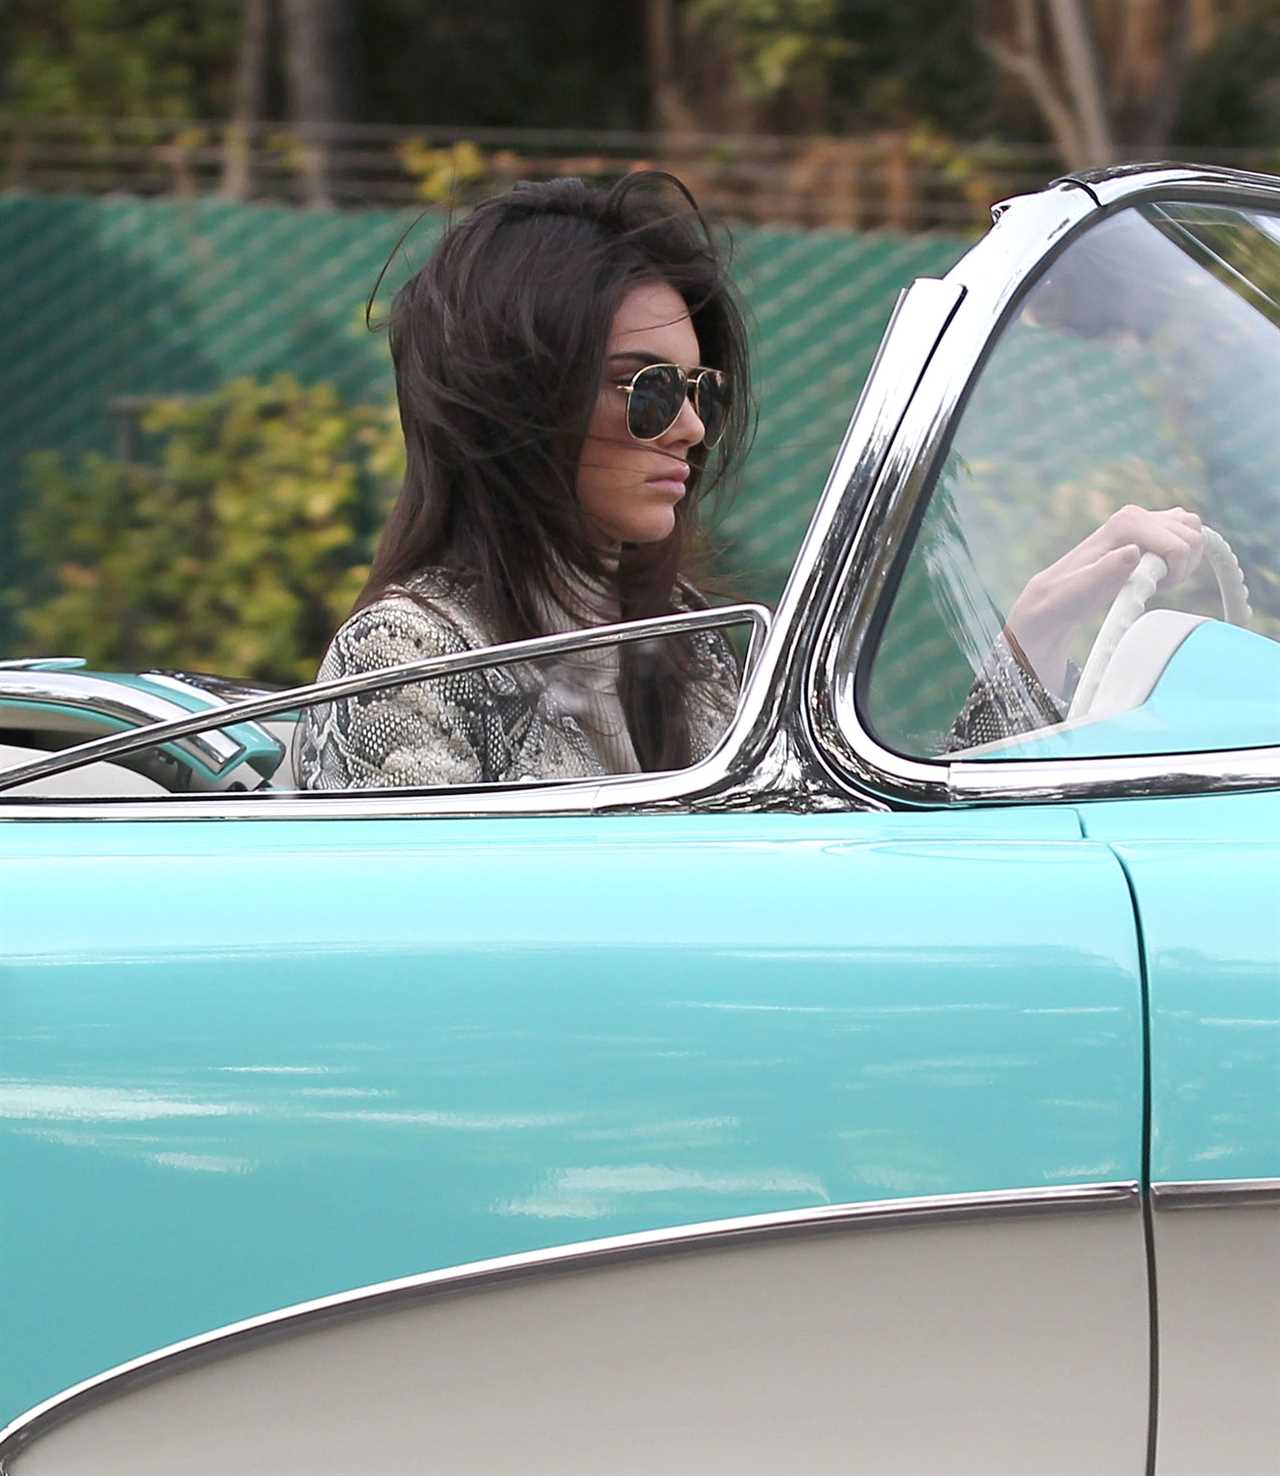 Inside Kendall Jenner’s private $2.3M car collection with a $220K 1960 Cadillac